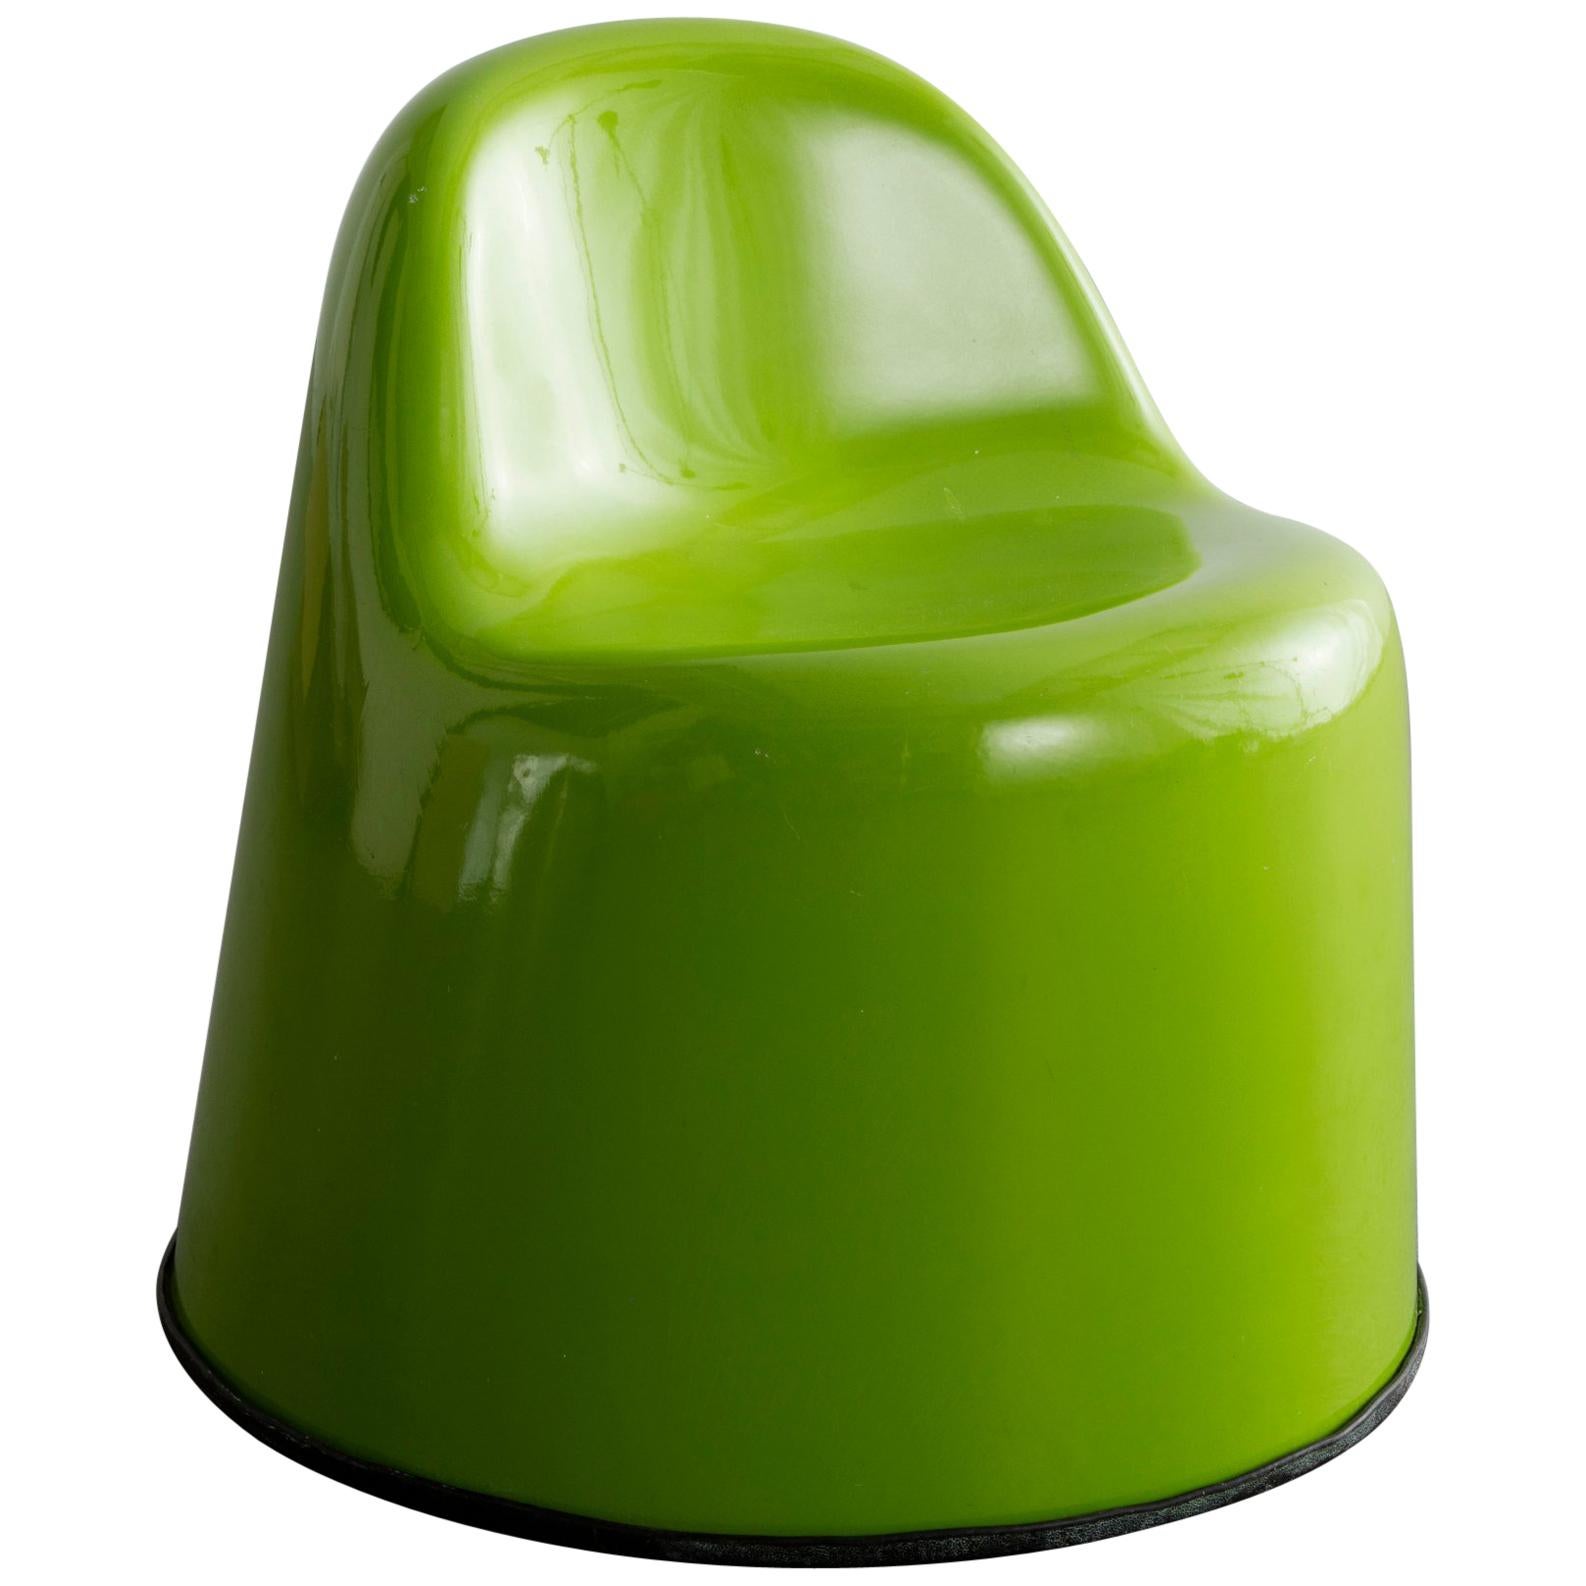 Baby Molar Chair in Lime Green Plastic by Wendell Castle, 1971